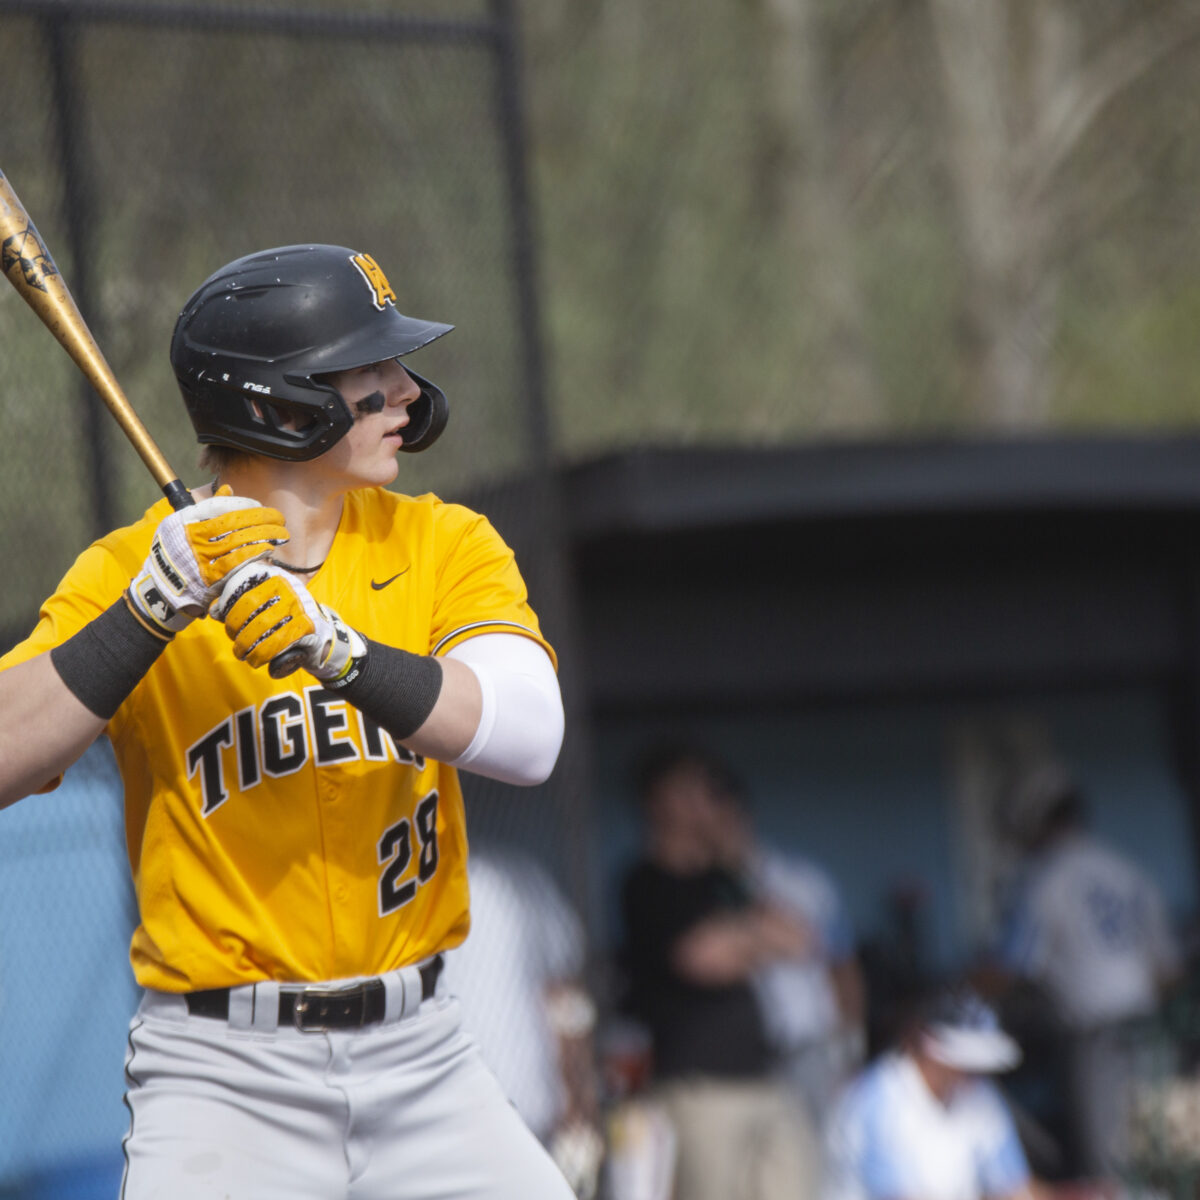 PUP baseball notebook: No growing pains for unbeaten North Allegheny despite major roster turnover